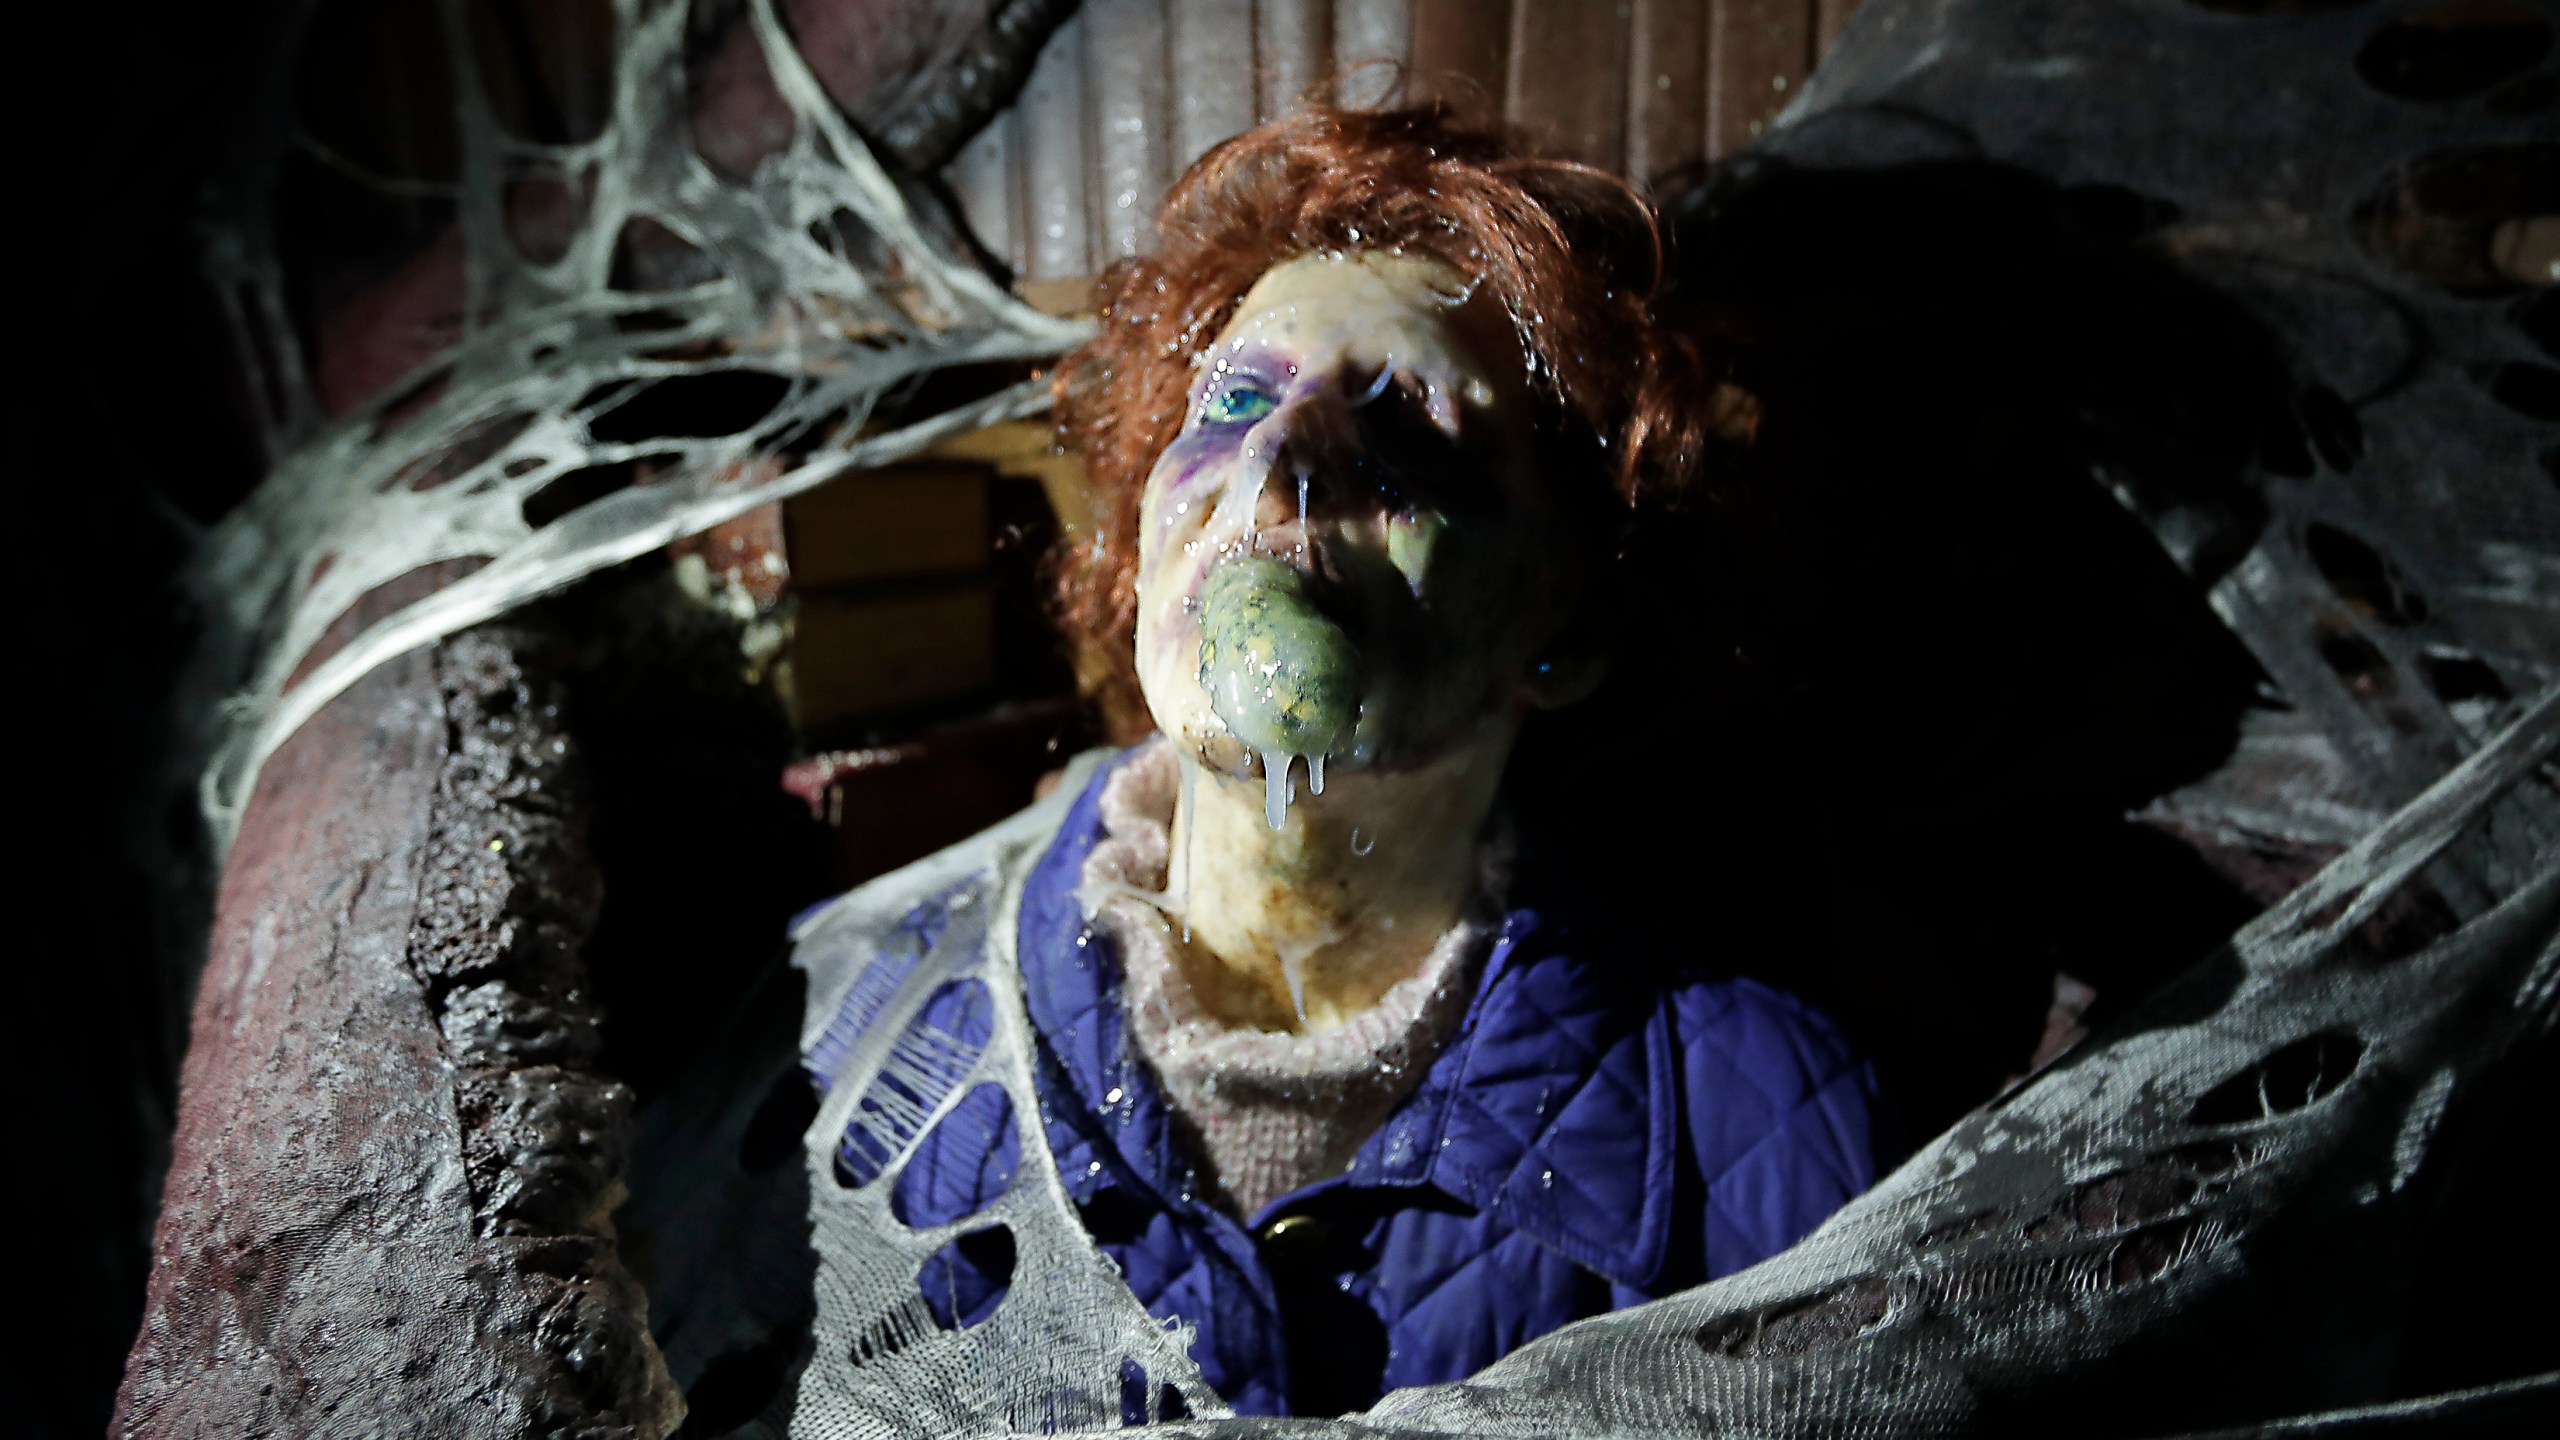 In this Sept. 12, 2018 file photo, the character Barb appears in grand, gory style in the Stranger Things haunted house during Halloween Horror nights at Universal Studios in Orlando, Fla. After a pandemic-related absence of a year, Halloween Horror Nights are back with haunted houses based on the “Texas Chainsaw Massacre” and “The Bride of Frankenstein" planned for Universal theme parks in California and Florida, the company announced Thursday, July 15, 2021. (AP Photo/John Raoux, File)